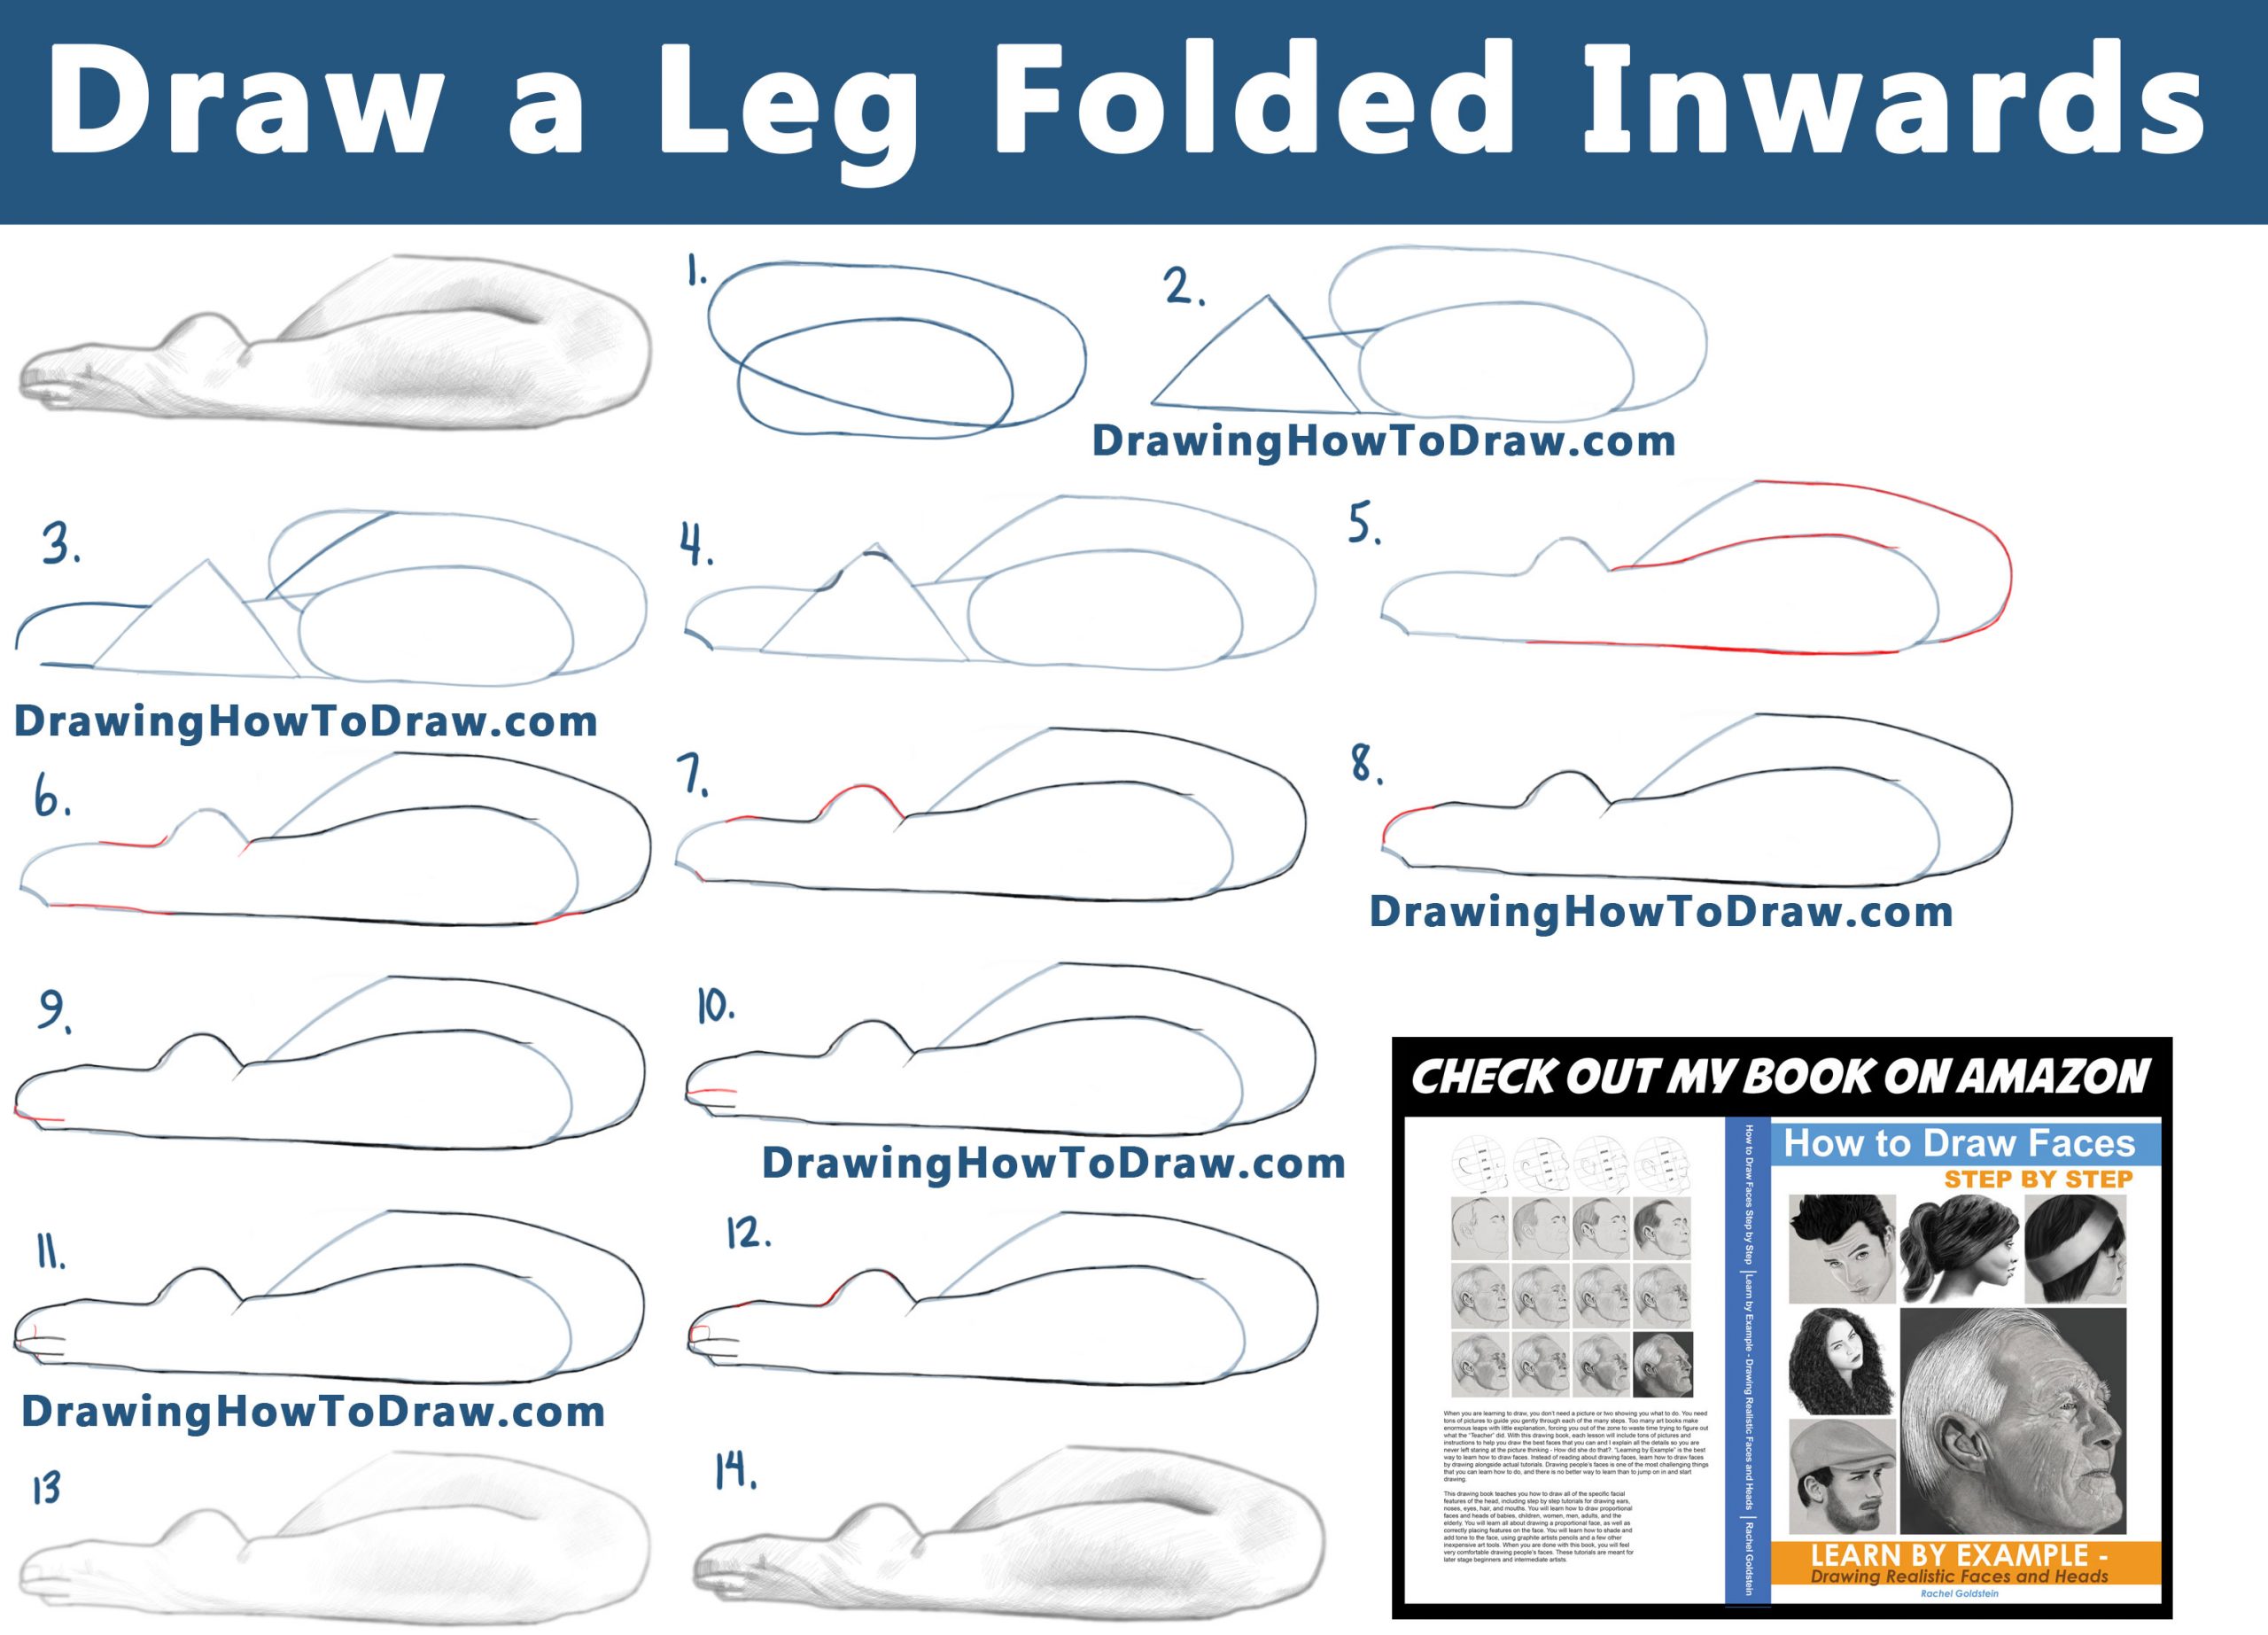 How to Draw a Leg and Foot Folded Inwards, Like in a Criss-Cross Applesauce Position:  Step by Step Tutorial 06